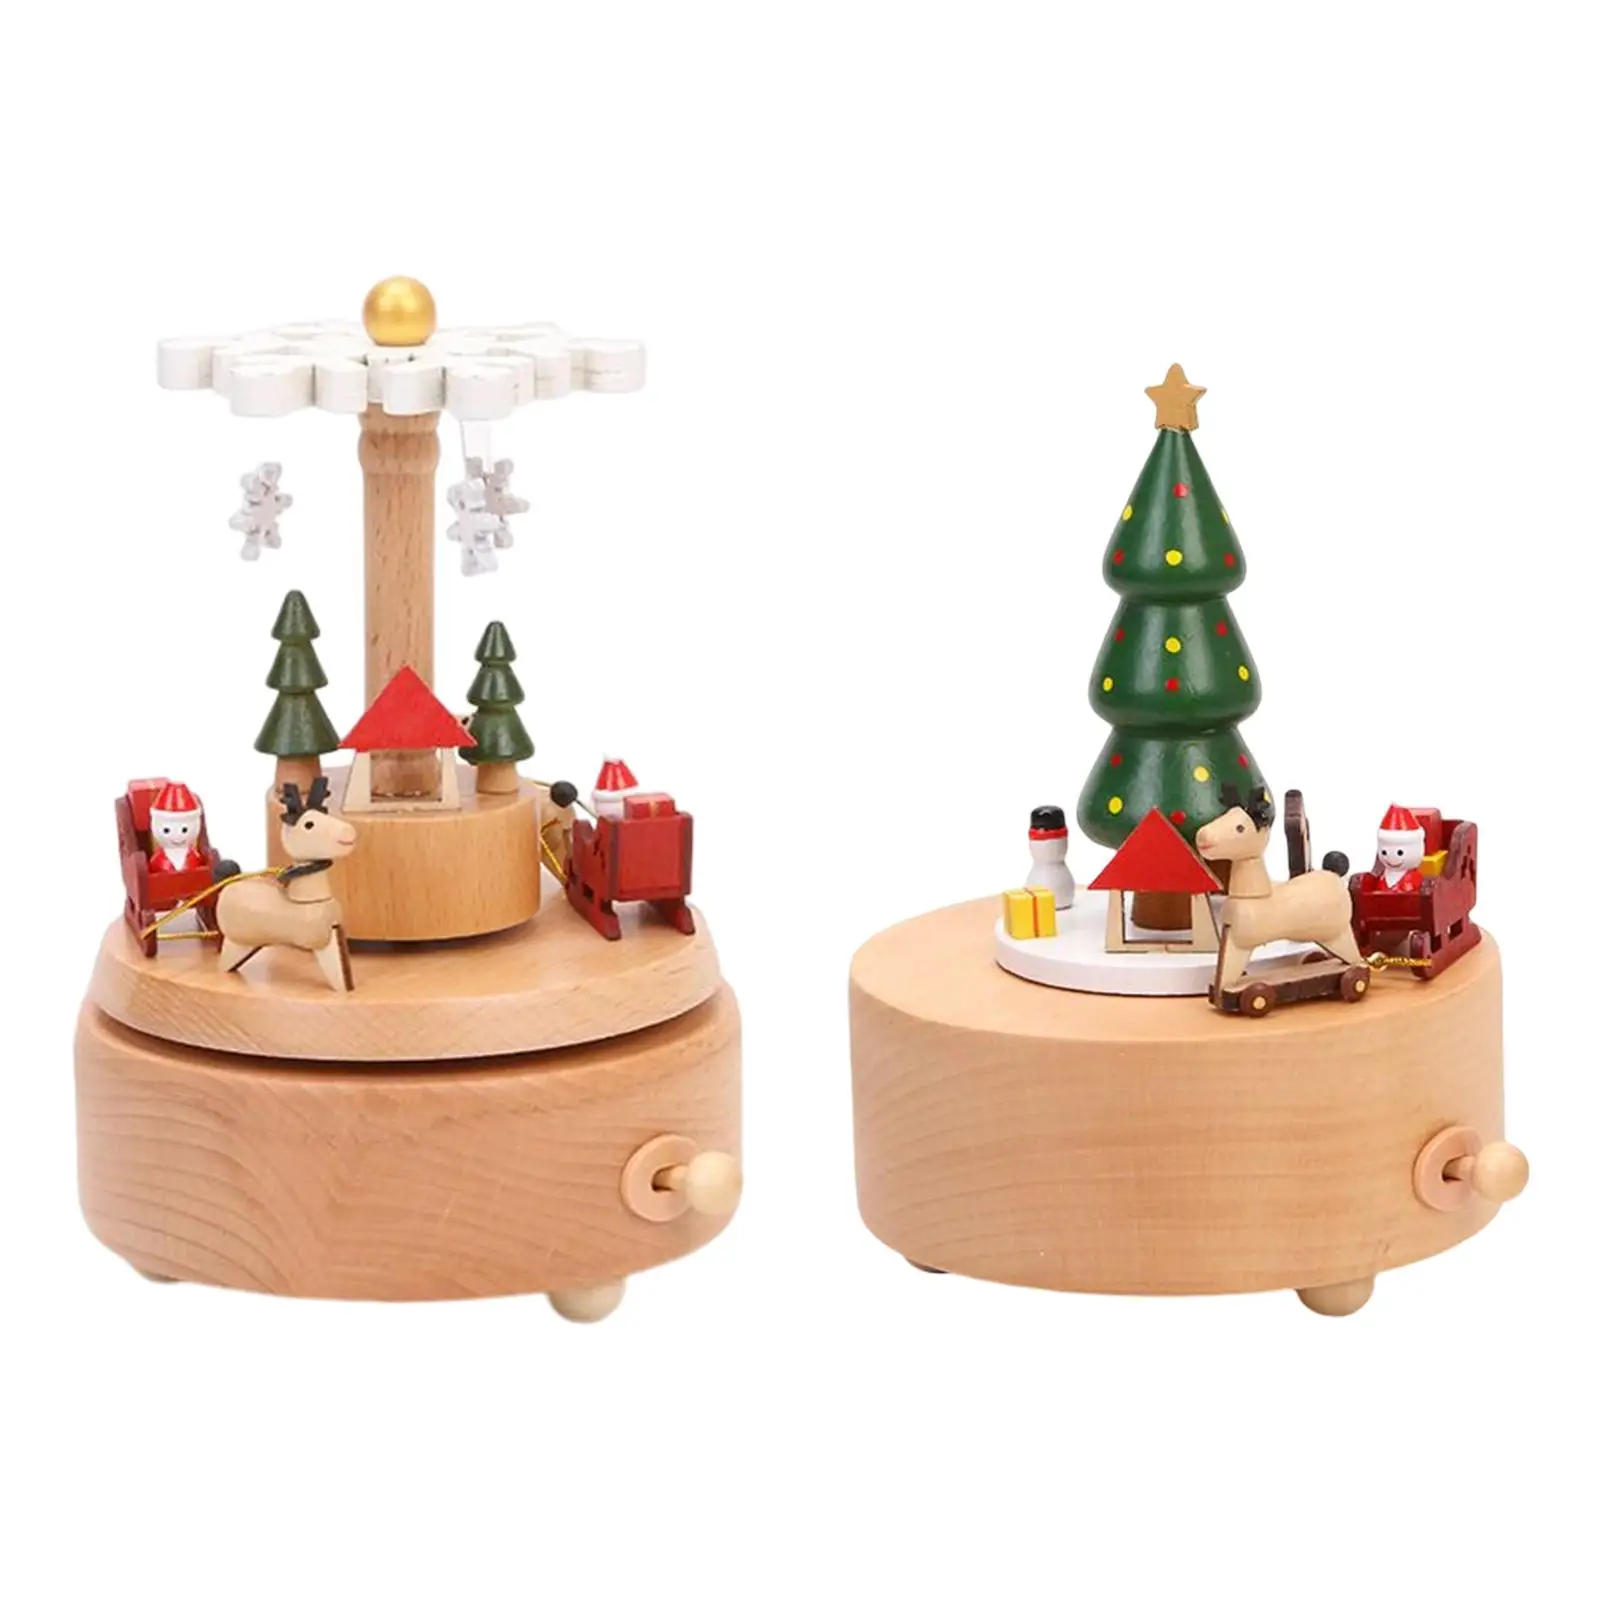 Creative Christmas Music Box Rotatable Wood Musical Box Carousel Toy Crafts for Desktop Holiday Home Decor Kids Girls Gift